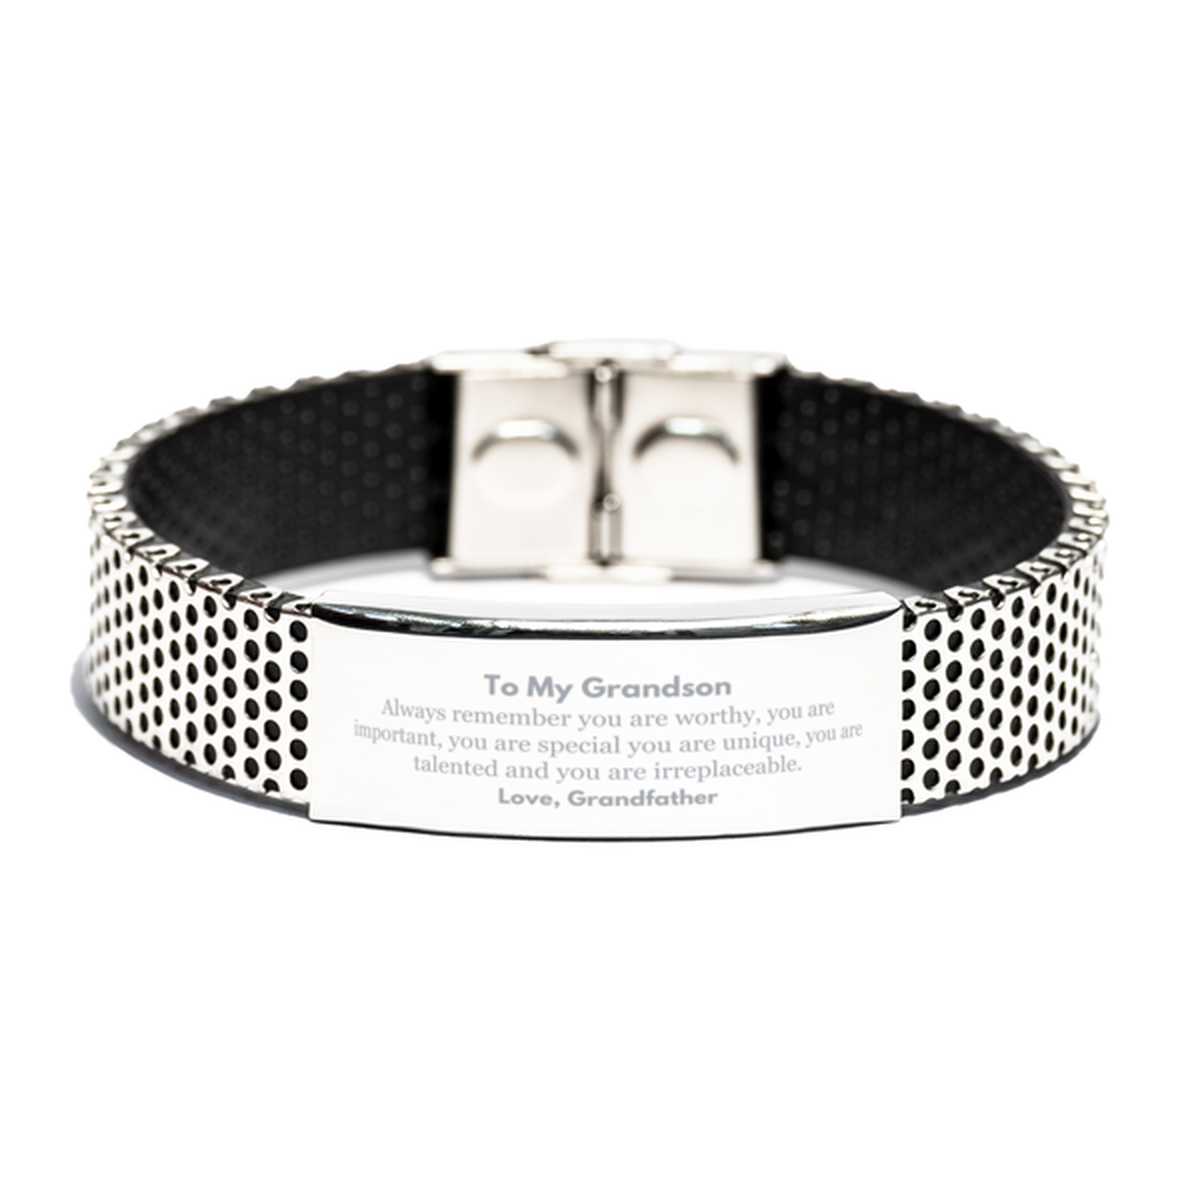 Grandson Birthday Gifts from Grandfather, Inspirational Stainless Steel Bracelet for Grandson Christmas Graduation Gifts for Grandson Always remember you are worthy, you are important. Love, Grandfather